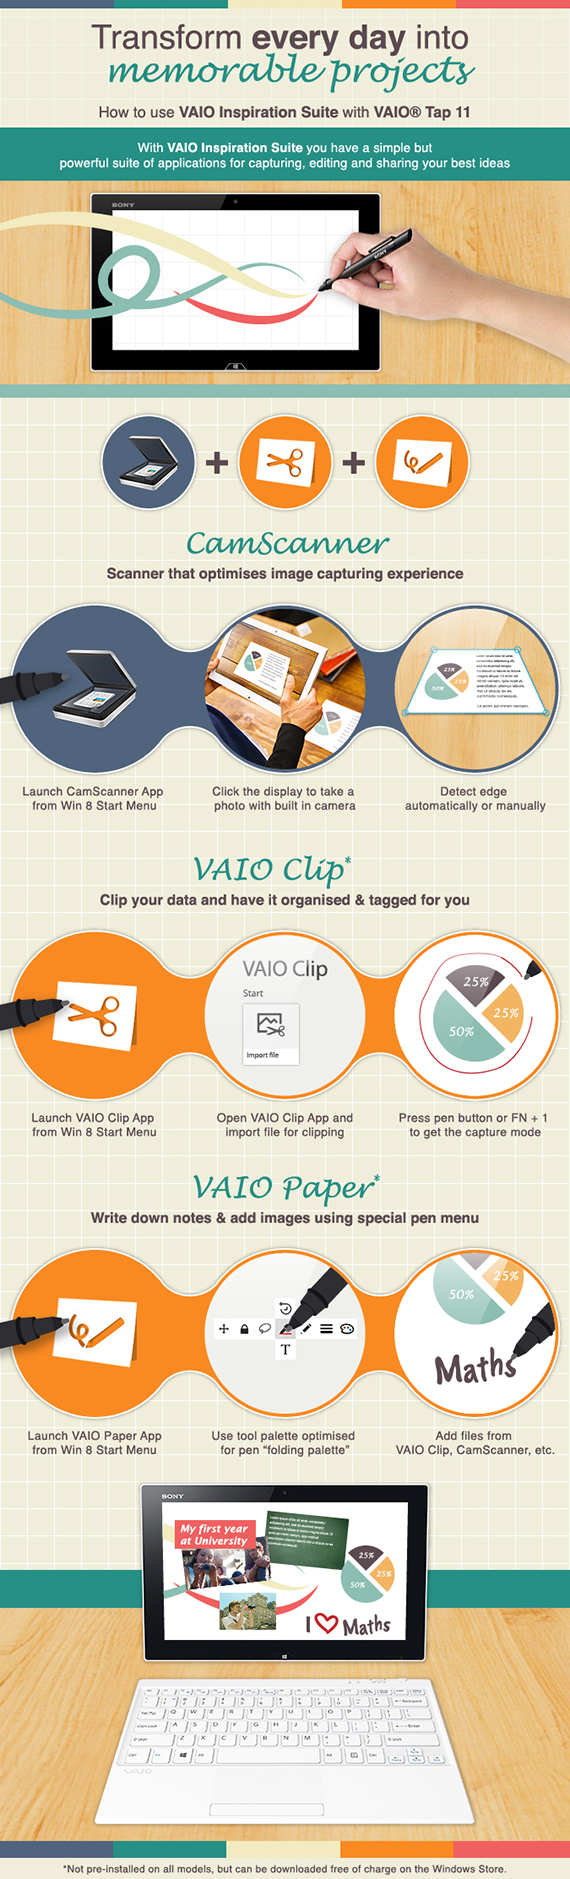 How to use VAIO Inspiration Suite - Infographic